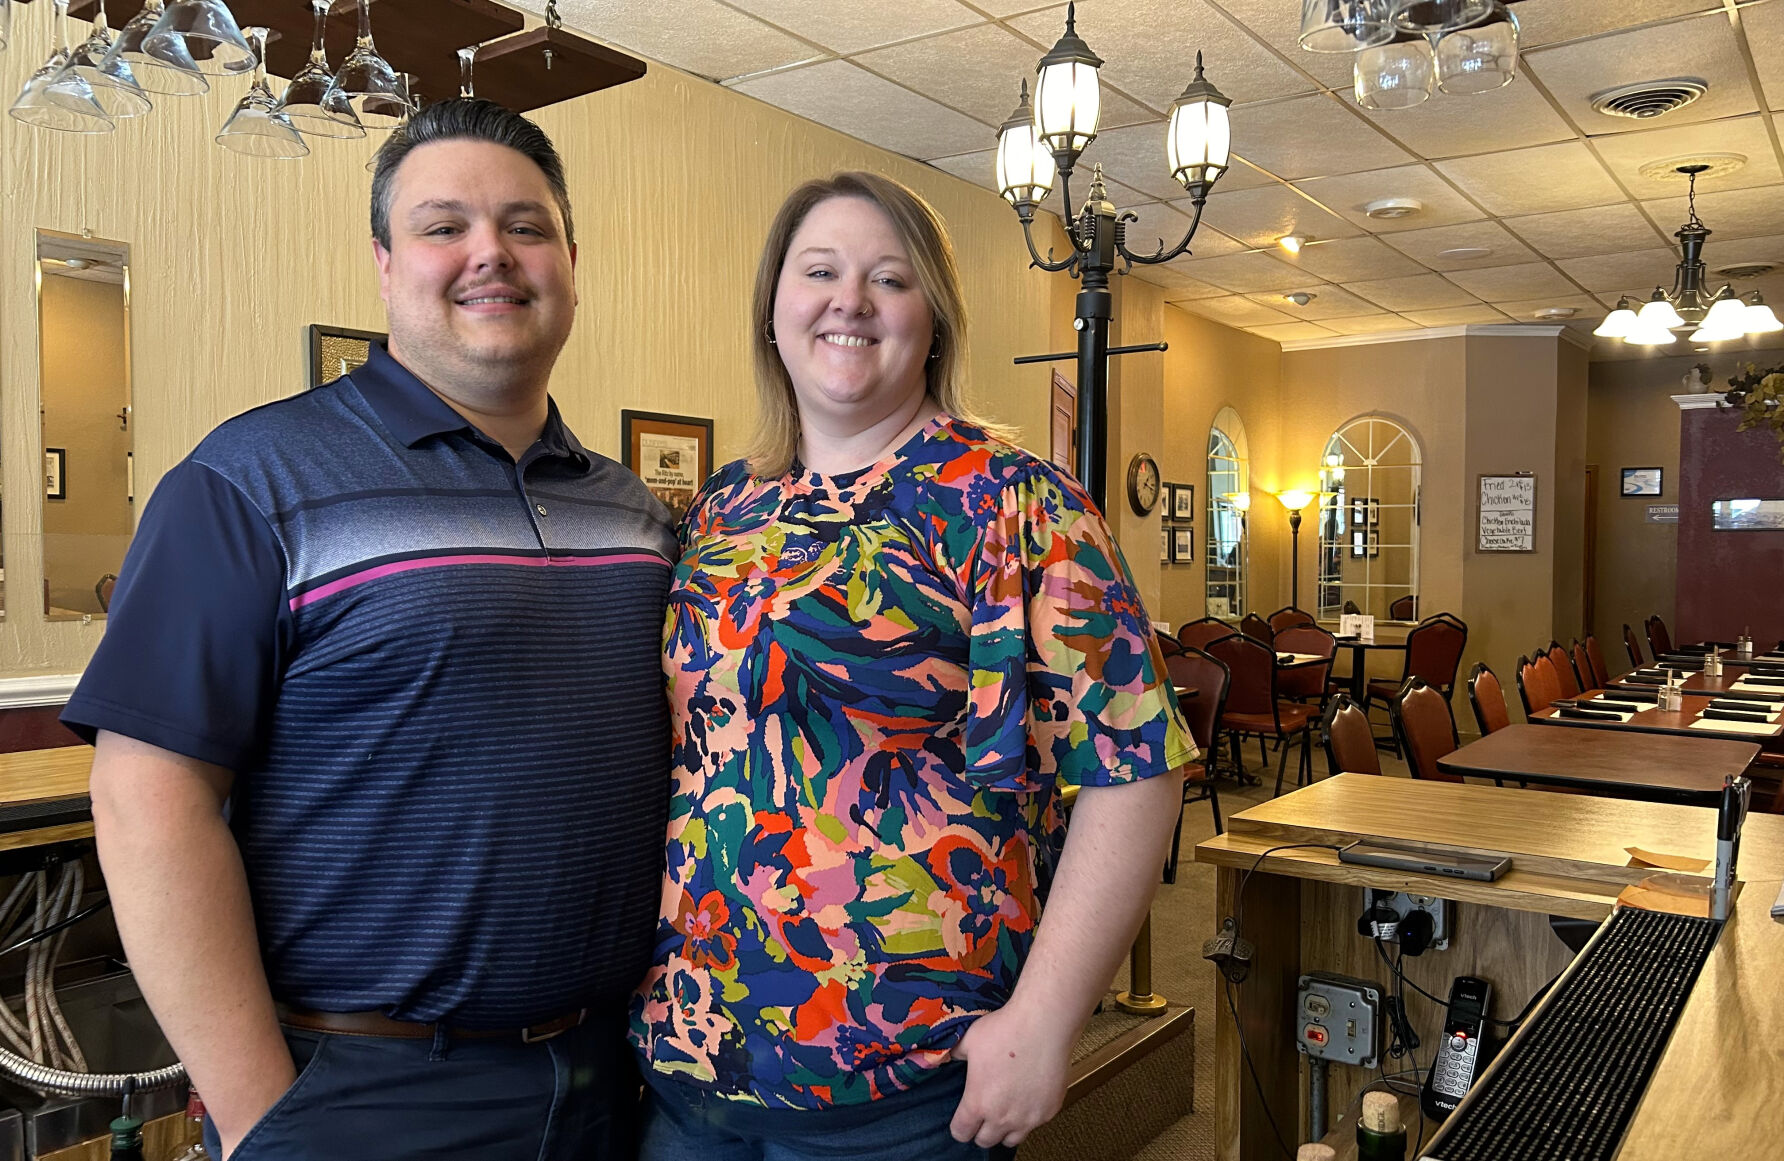 Dan and Megan Engstrom are the owners of The Ritz, a 76-year-old restaurant on First Avenue in Dyersville, Iowa. The Engstroms purchased the restaurant from Megan’s parents.    PHOTO CREDIT: Erik Hogstrom Telegraph Herald